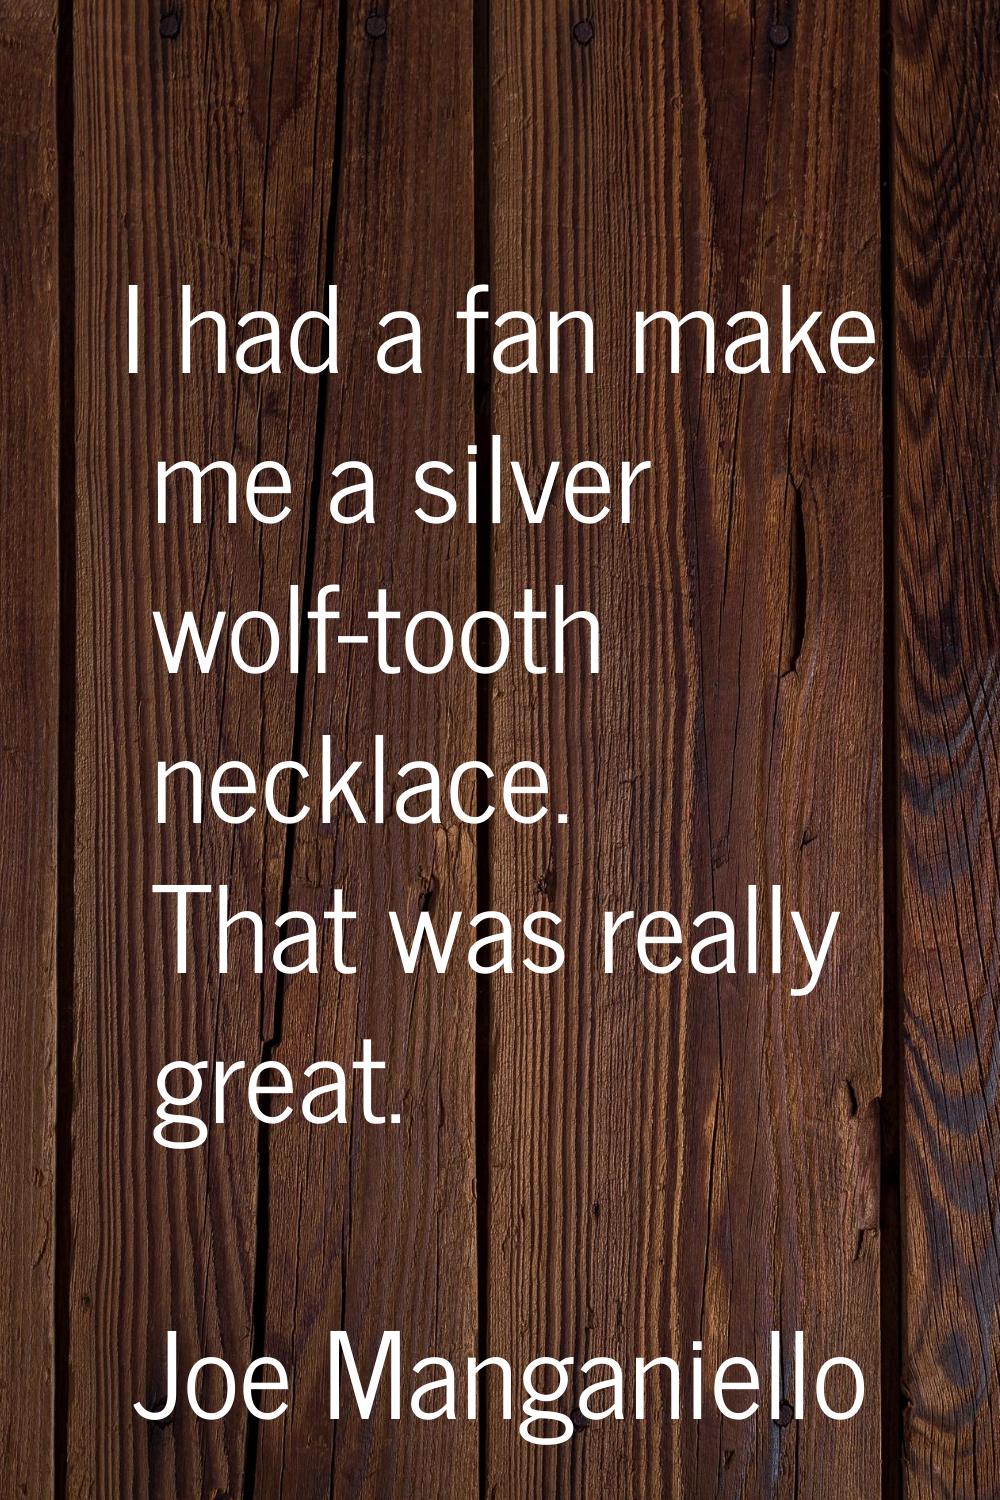 I had a fan make me a silver wolf-tooth necklace. That was really great.